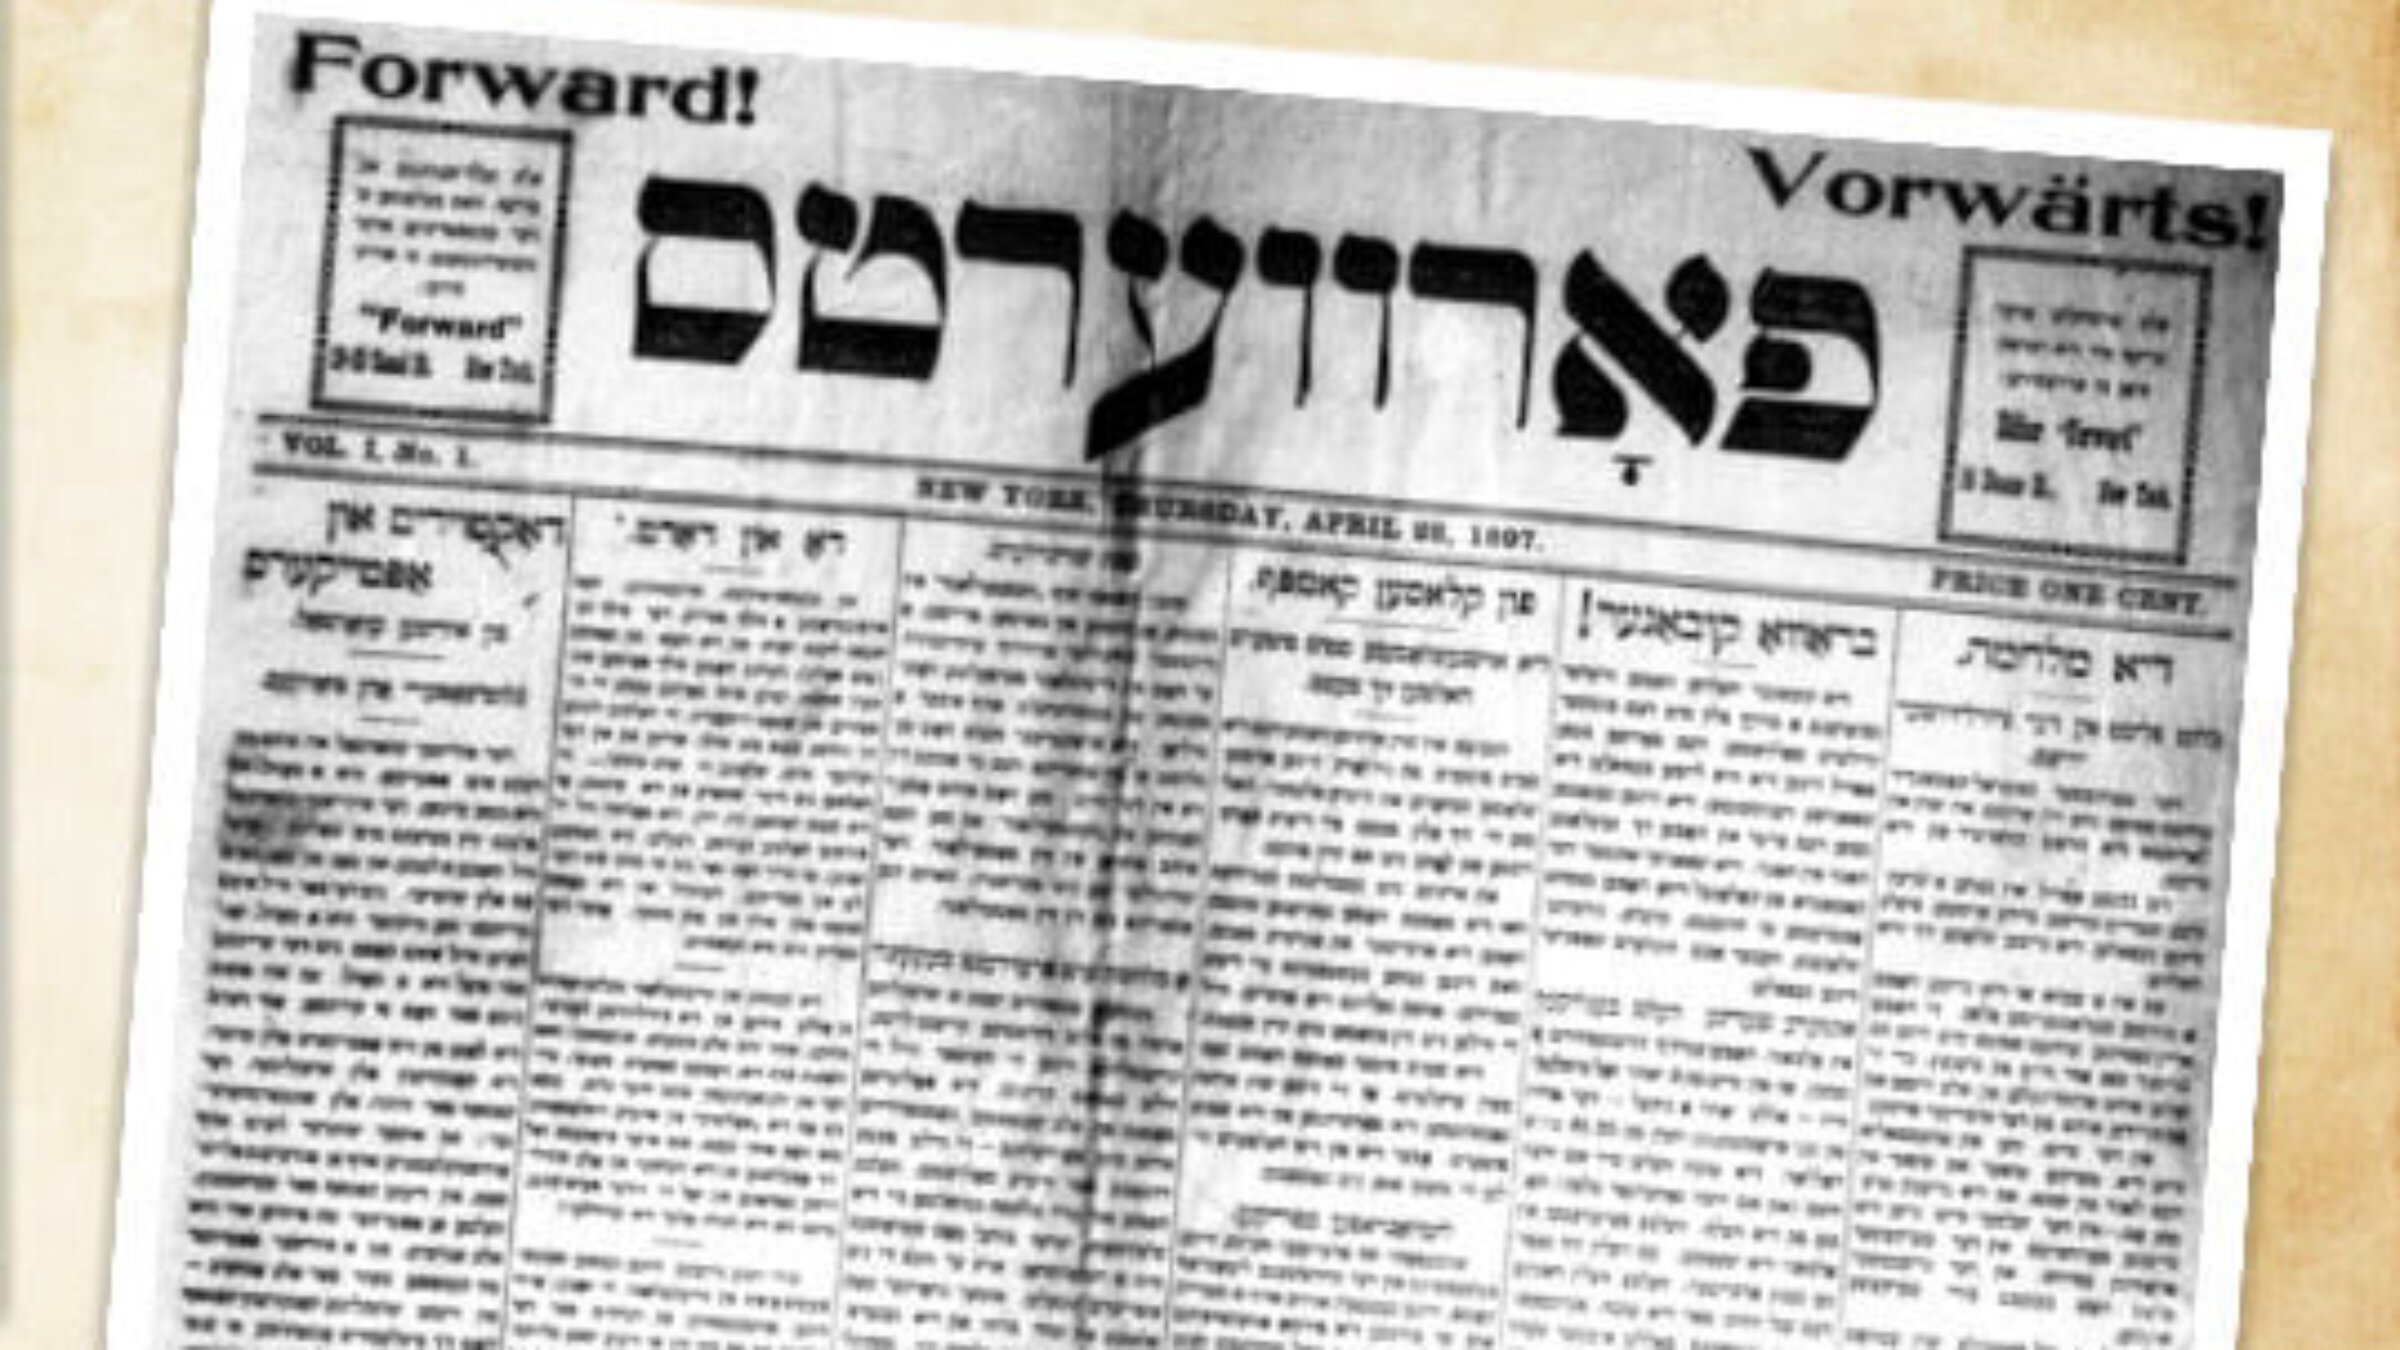 The front page of the first issue of the Jewish Daily Forward from April 22, 1897.